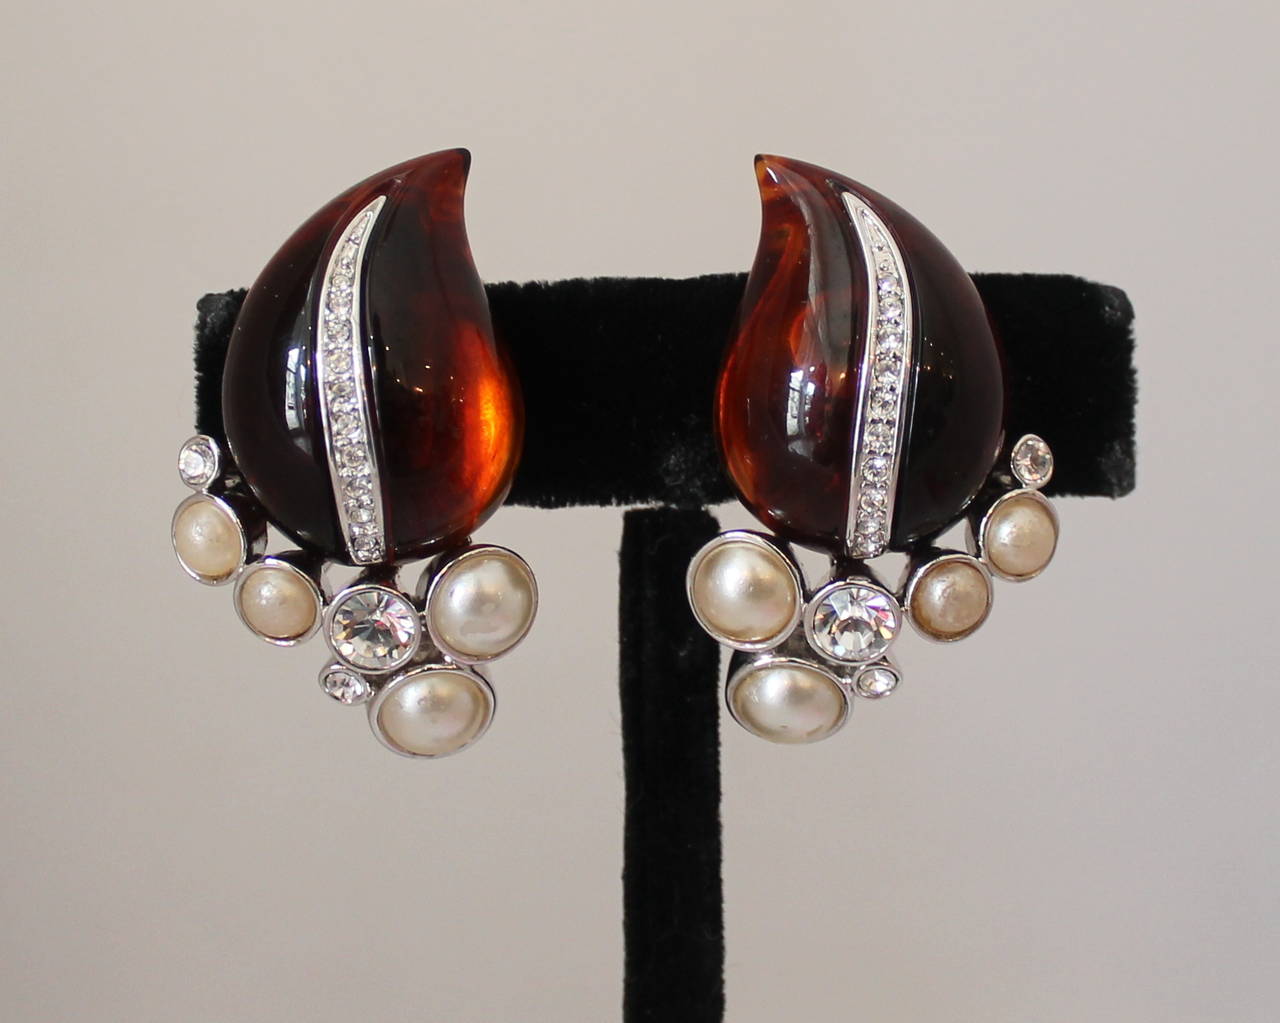 Kenneth Jay Lane 1990's Amber, Leaf & Rhinestone Clip-on Earrings. These earrings are in excellent vintage condition and are a silver-tone. The stone is amber-colored and is adorned with clear rhinestones and pearls on the bottom.

Length-